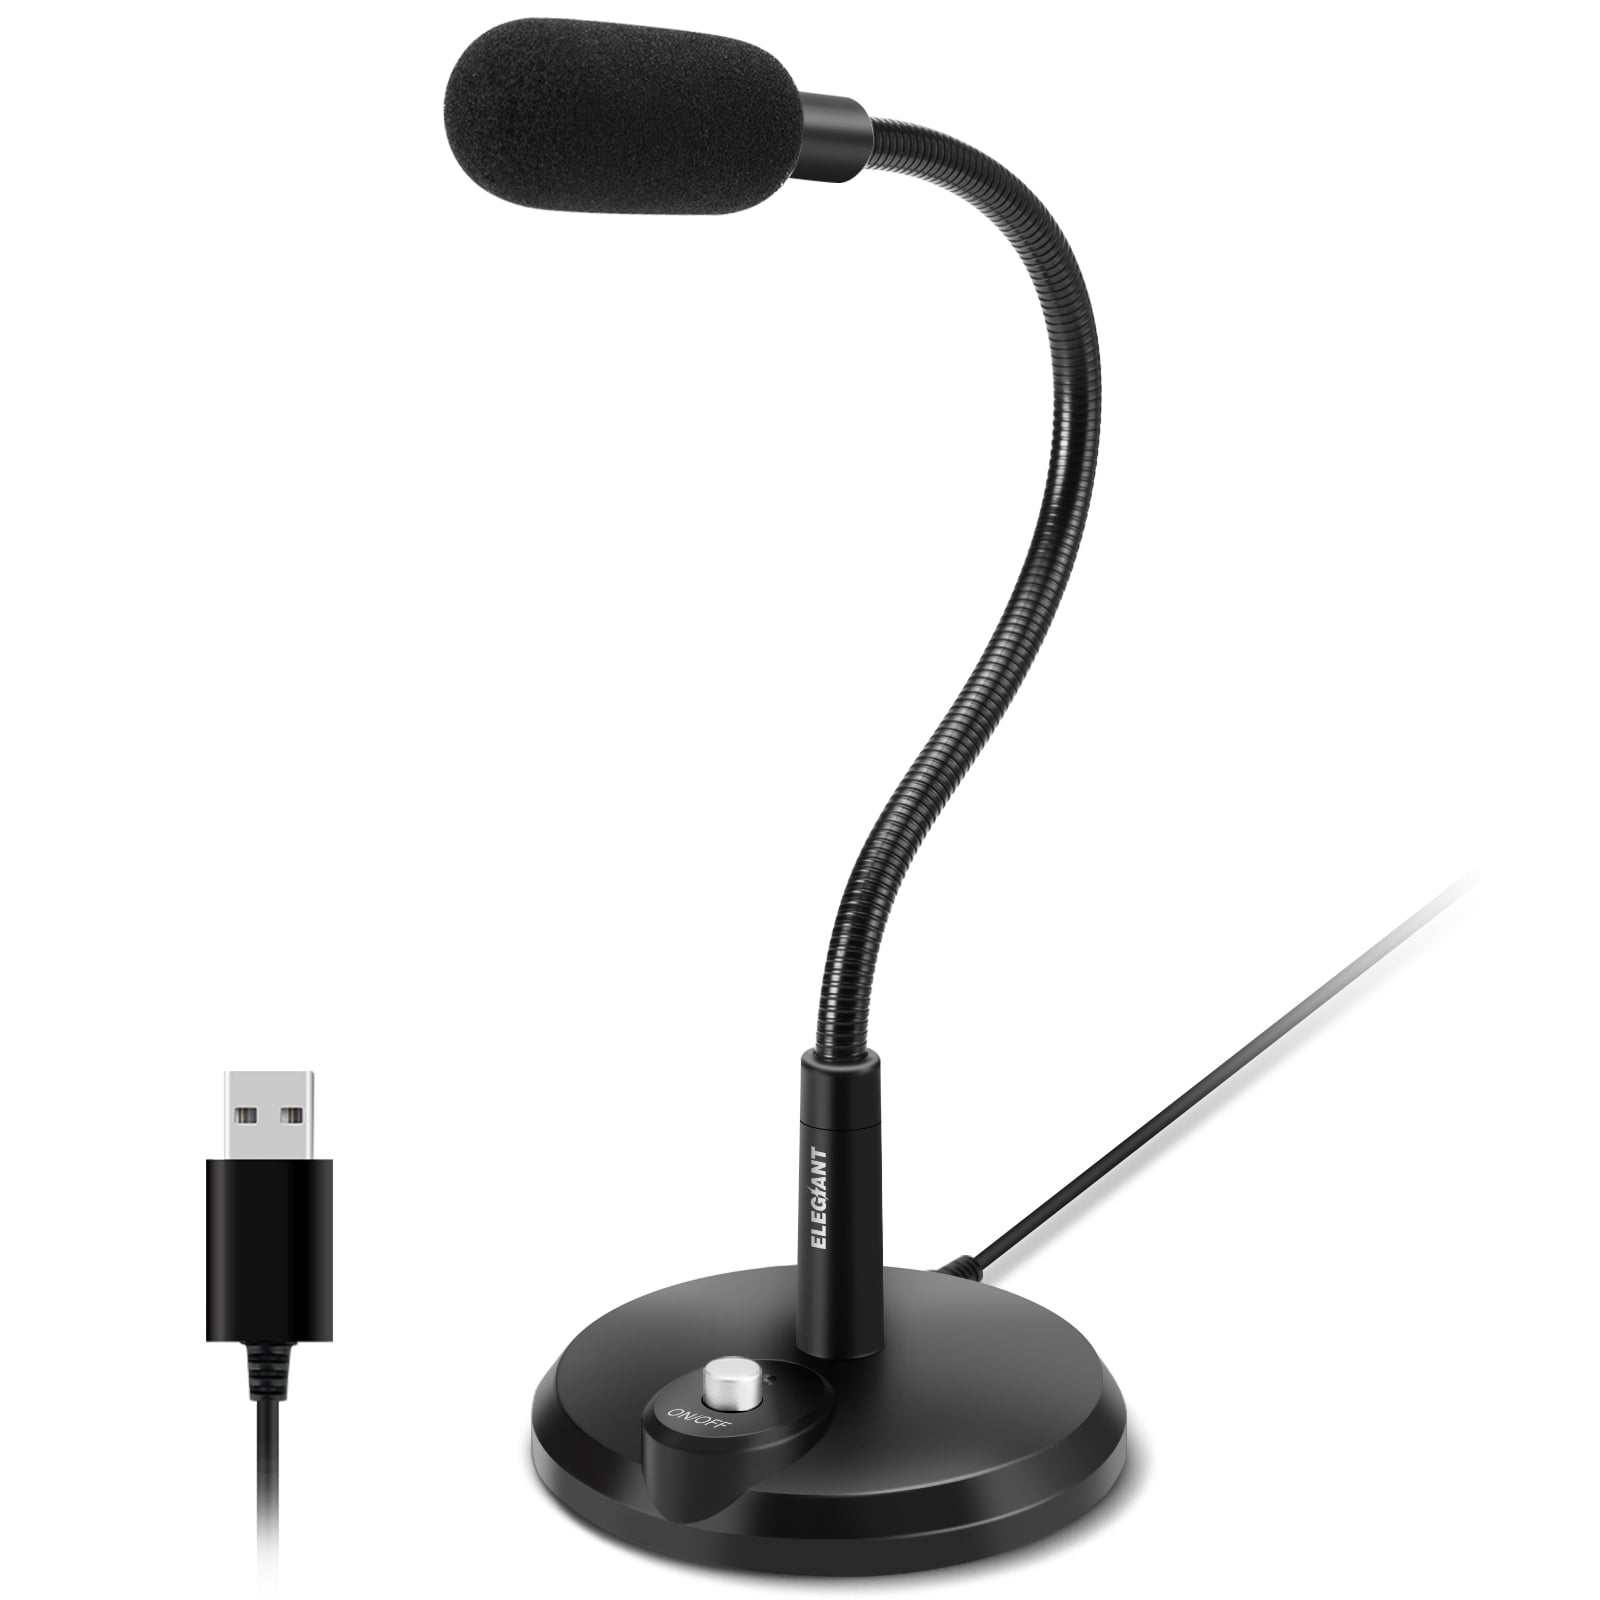 Ideal for Recording 1.5m /5ft Gaming XIAOKOA USB Microphone for Computer Podcasting Plug&Play Desktop Omnidirectional PC Condenser Mic Compatible with Windows/Mac YouTube 